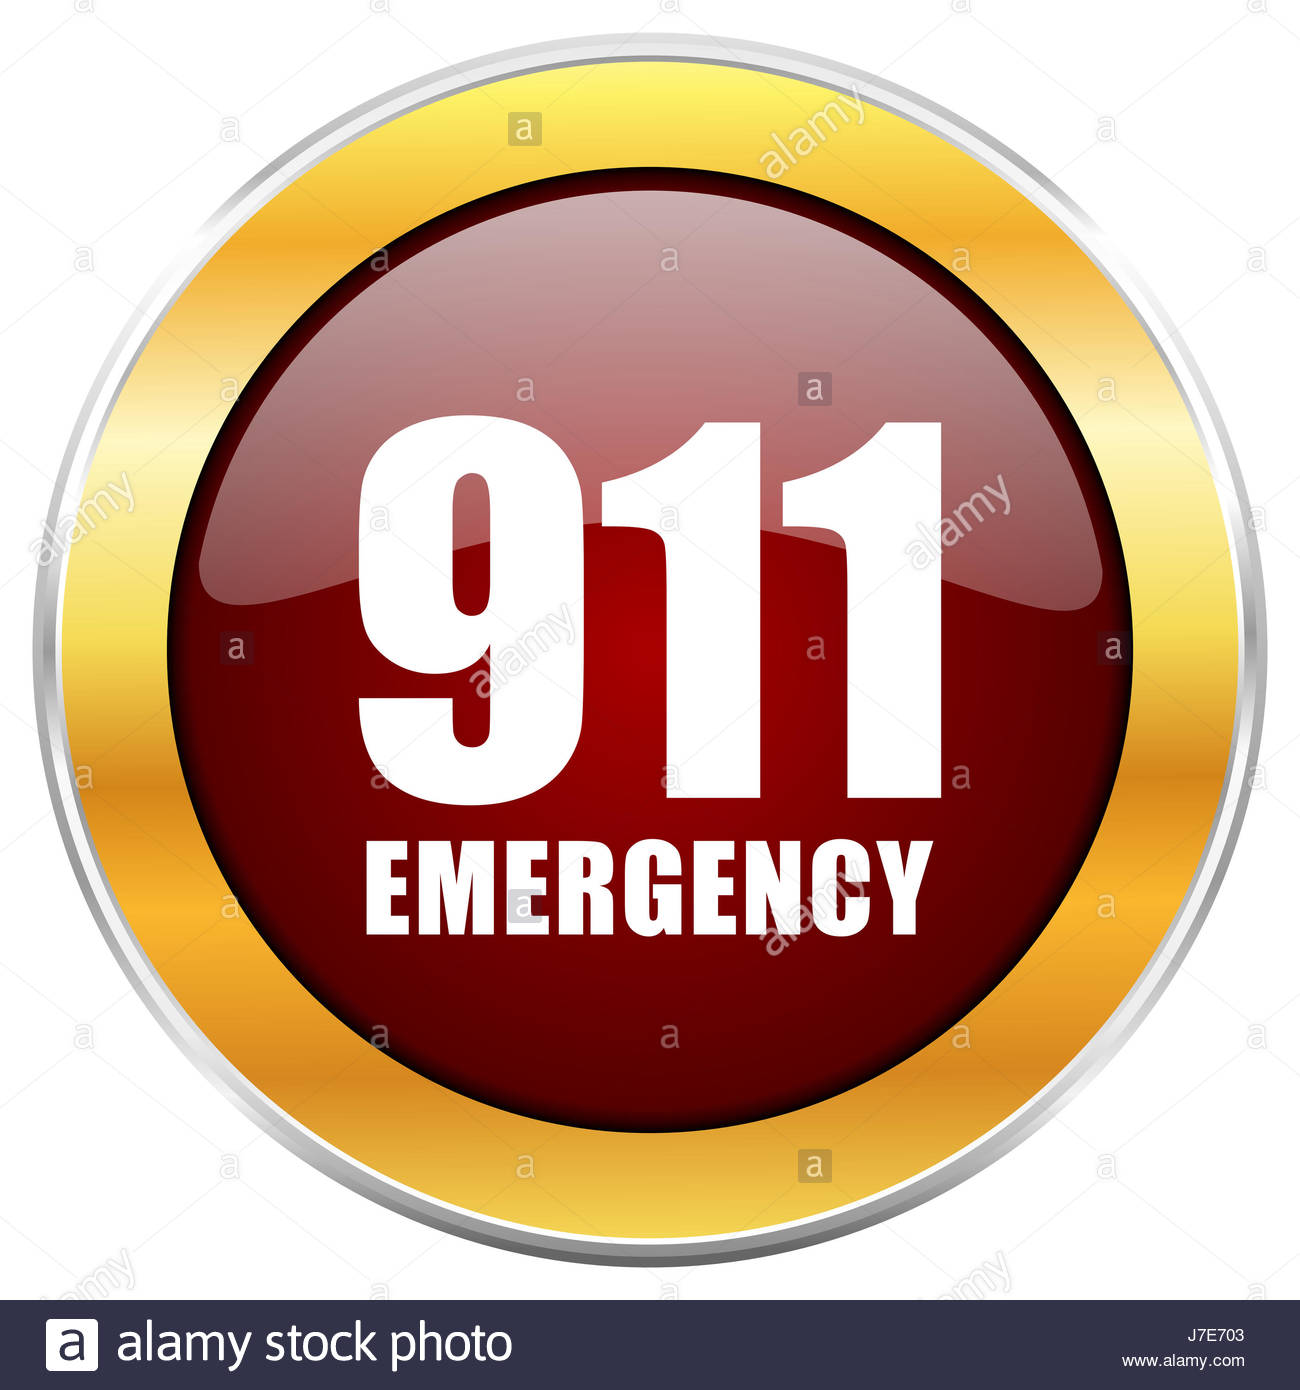 Stock Illustration of number emergency 911 icon k32920995 - Search 